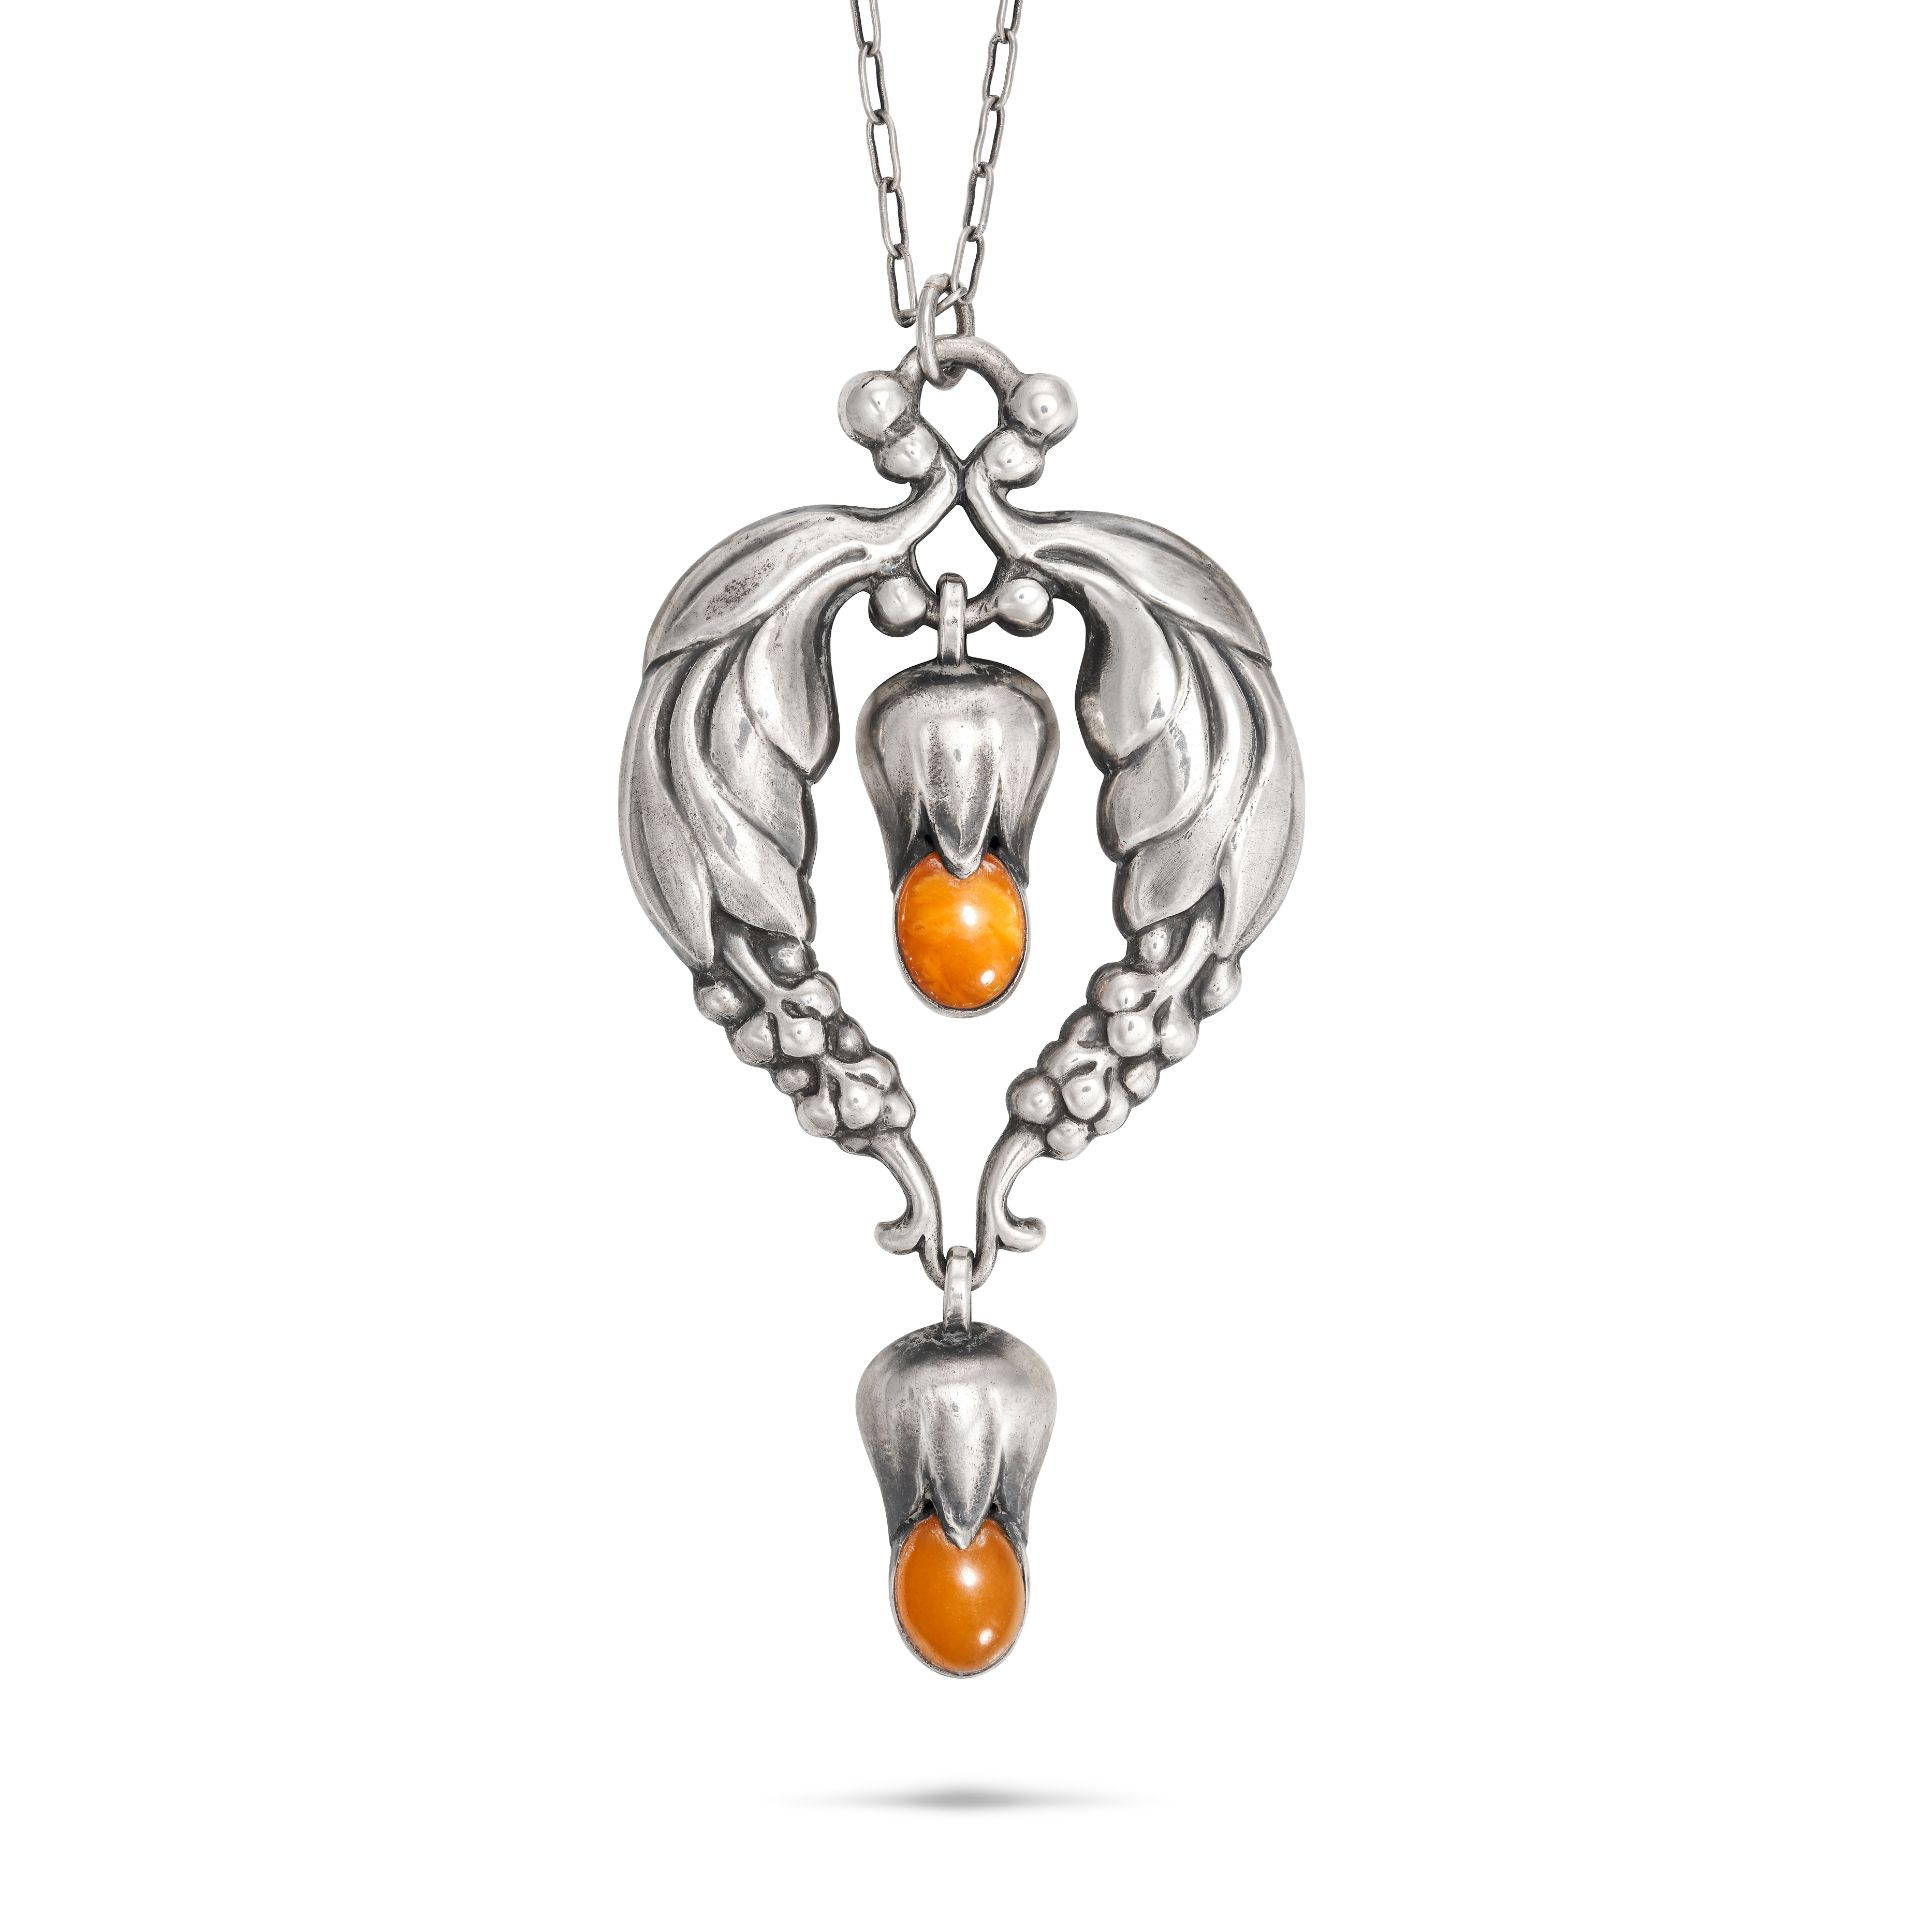 GEORG JENSEN, AN AMBER NECKLACE in silver, design number 51, the foliate pendant set with cabocho...